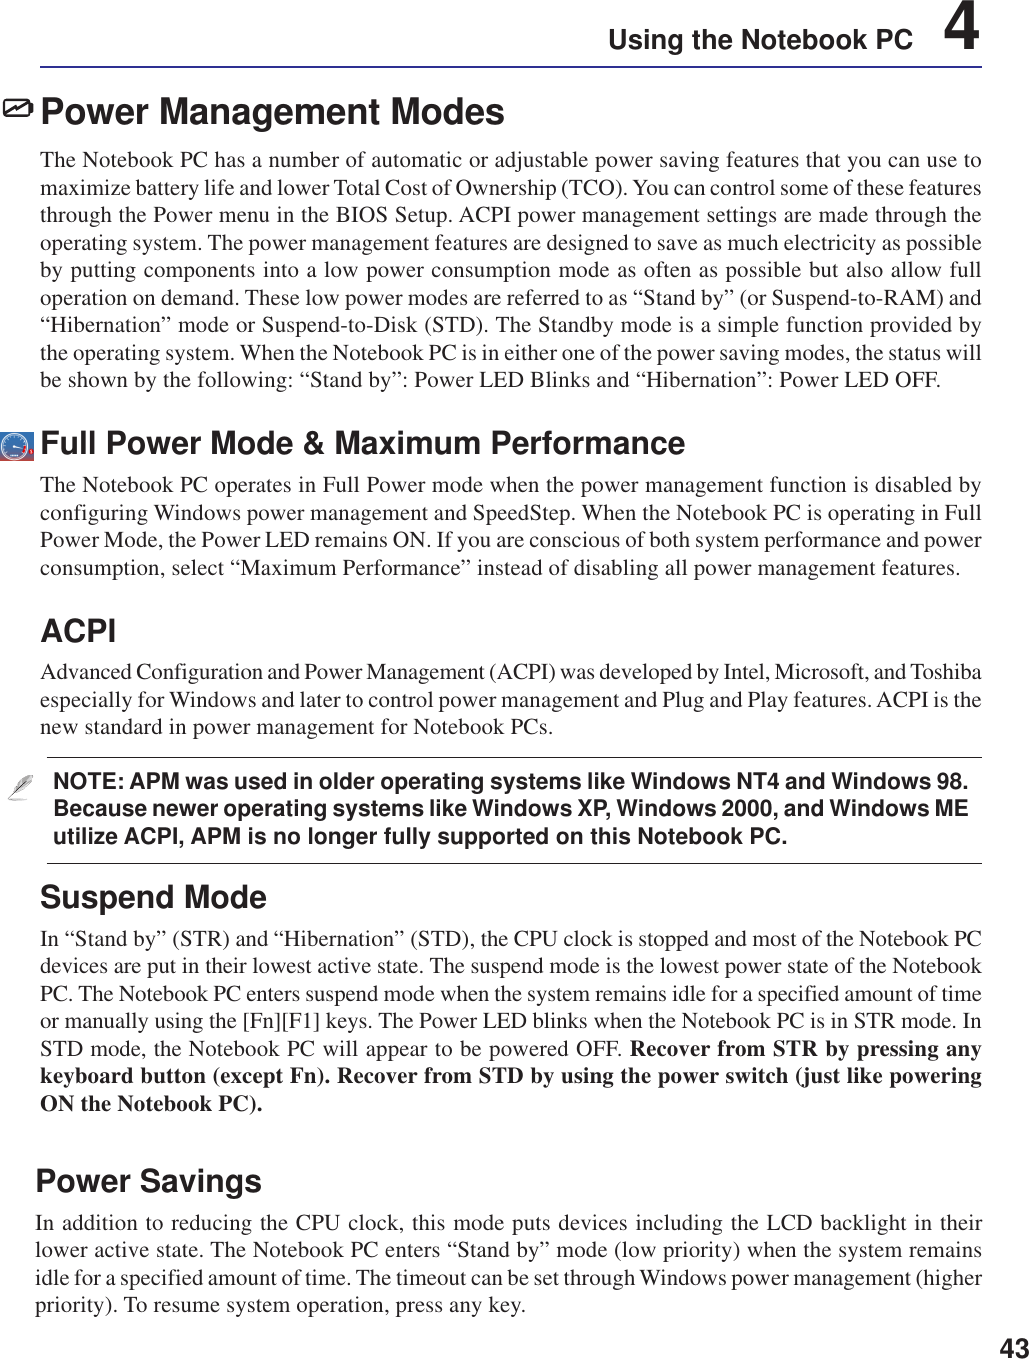 43Using the Notebook PC    4Power Management ModesThe Notebook PC has a number of automatic or adjustable power saving features that you can use tomaximize battery life and lower Total Cost of Ownership (TCO). You can control some of these featuresthrough the Power menu in the BIOS Setup. ACPI power management settings are made through theoperating system. The power management features are designed to save as much electricity as possibleby putting components into a low power consumption mode as often as possible but also allow fulloperation on demand. These low power modes are referred to as “Stand by” (or Suspend-to-RAM) and“Hibernation” mode or Suspend-to-Disk (STD). The Standby mode is a simple function provided bythe operating system. When the Notebook PC is in either one of the power saving modes, the status willbe shown by the following: “Stand by”: Power LED Blinks and “Hibernation”: Power LED OFF.Full Power Mode &amp; Maximum PerformanceThe Notebook PC operates in Full Power mode when the power management function is disabled byconfiguring Windows power management and SpeedStep. When the Notebook PC is operating in FullPower Mode, the Power LED remains ON. If you are conscious of both system performance and powerconsumption, select “Maximum Performance” instead of disabling all power management features.ACPIAdvanced Configuration and Power Management (ACPI) was developed by Intel, Microsoft, and Toshibaespecially for Windows and later to control power management and Plug and Play features. ACPI is thenew standard in power management for Notebook PCs.NOTE: APM was used in older operating systems like Windows NT4 and Windows 98.Because newer operating systems like Windows XP, Windows 2000, and Windows MEutilize ACPI, APM is no longer fully supported on this Notebook PC.Suspend ModeIn “Stand by” (STR) and “Hibernation” (STD), the CPU clock is stopped and most of the Notebook PCdevices are put in their lowest active state. The suspend mode is the lowest power state of the NotebookPC. The Notebook PC enters suspend mode when the system remains idle for a specified amount of timeor manually using the [Fn][F1] keys. The Power LED blinks when the Notebook PC is in STR mode. InSTD mode, the Notebook PC will appear to be powered OFF. Recover from STR by pressing anykeyboard button (except Fn). Recover from STD by using the power switch (just like poweringON the Notebook PC).Power SavingsIn addition to reducing the CPU clock, this mode puts devices including the LCD backlight in theirlower active state. The Notebook PC enters “Stand by” mode (low priority) when the system remainsidle for a specified amount of time. The timeout can be set through Windows power management (higherpriority). To resume system operation, press any key.